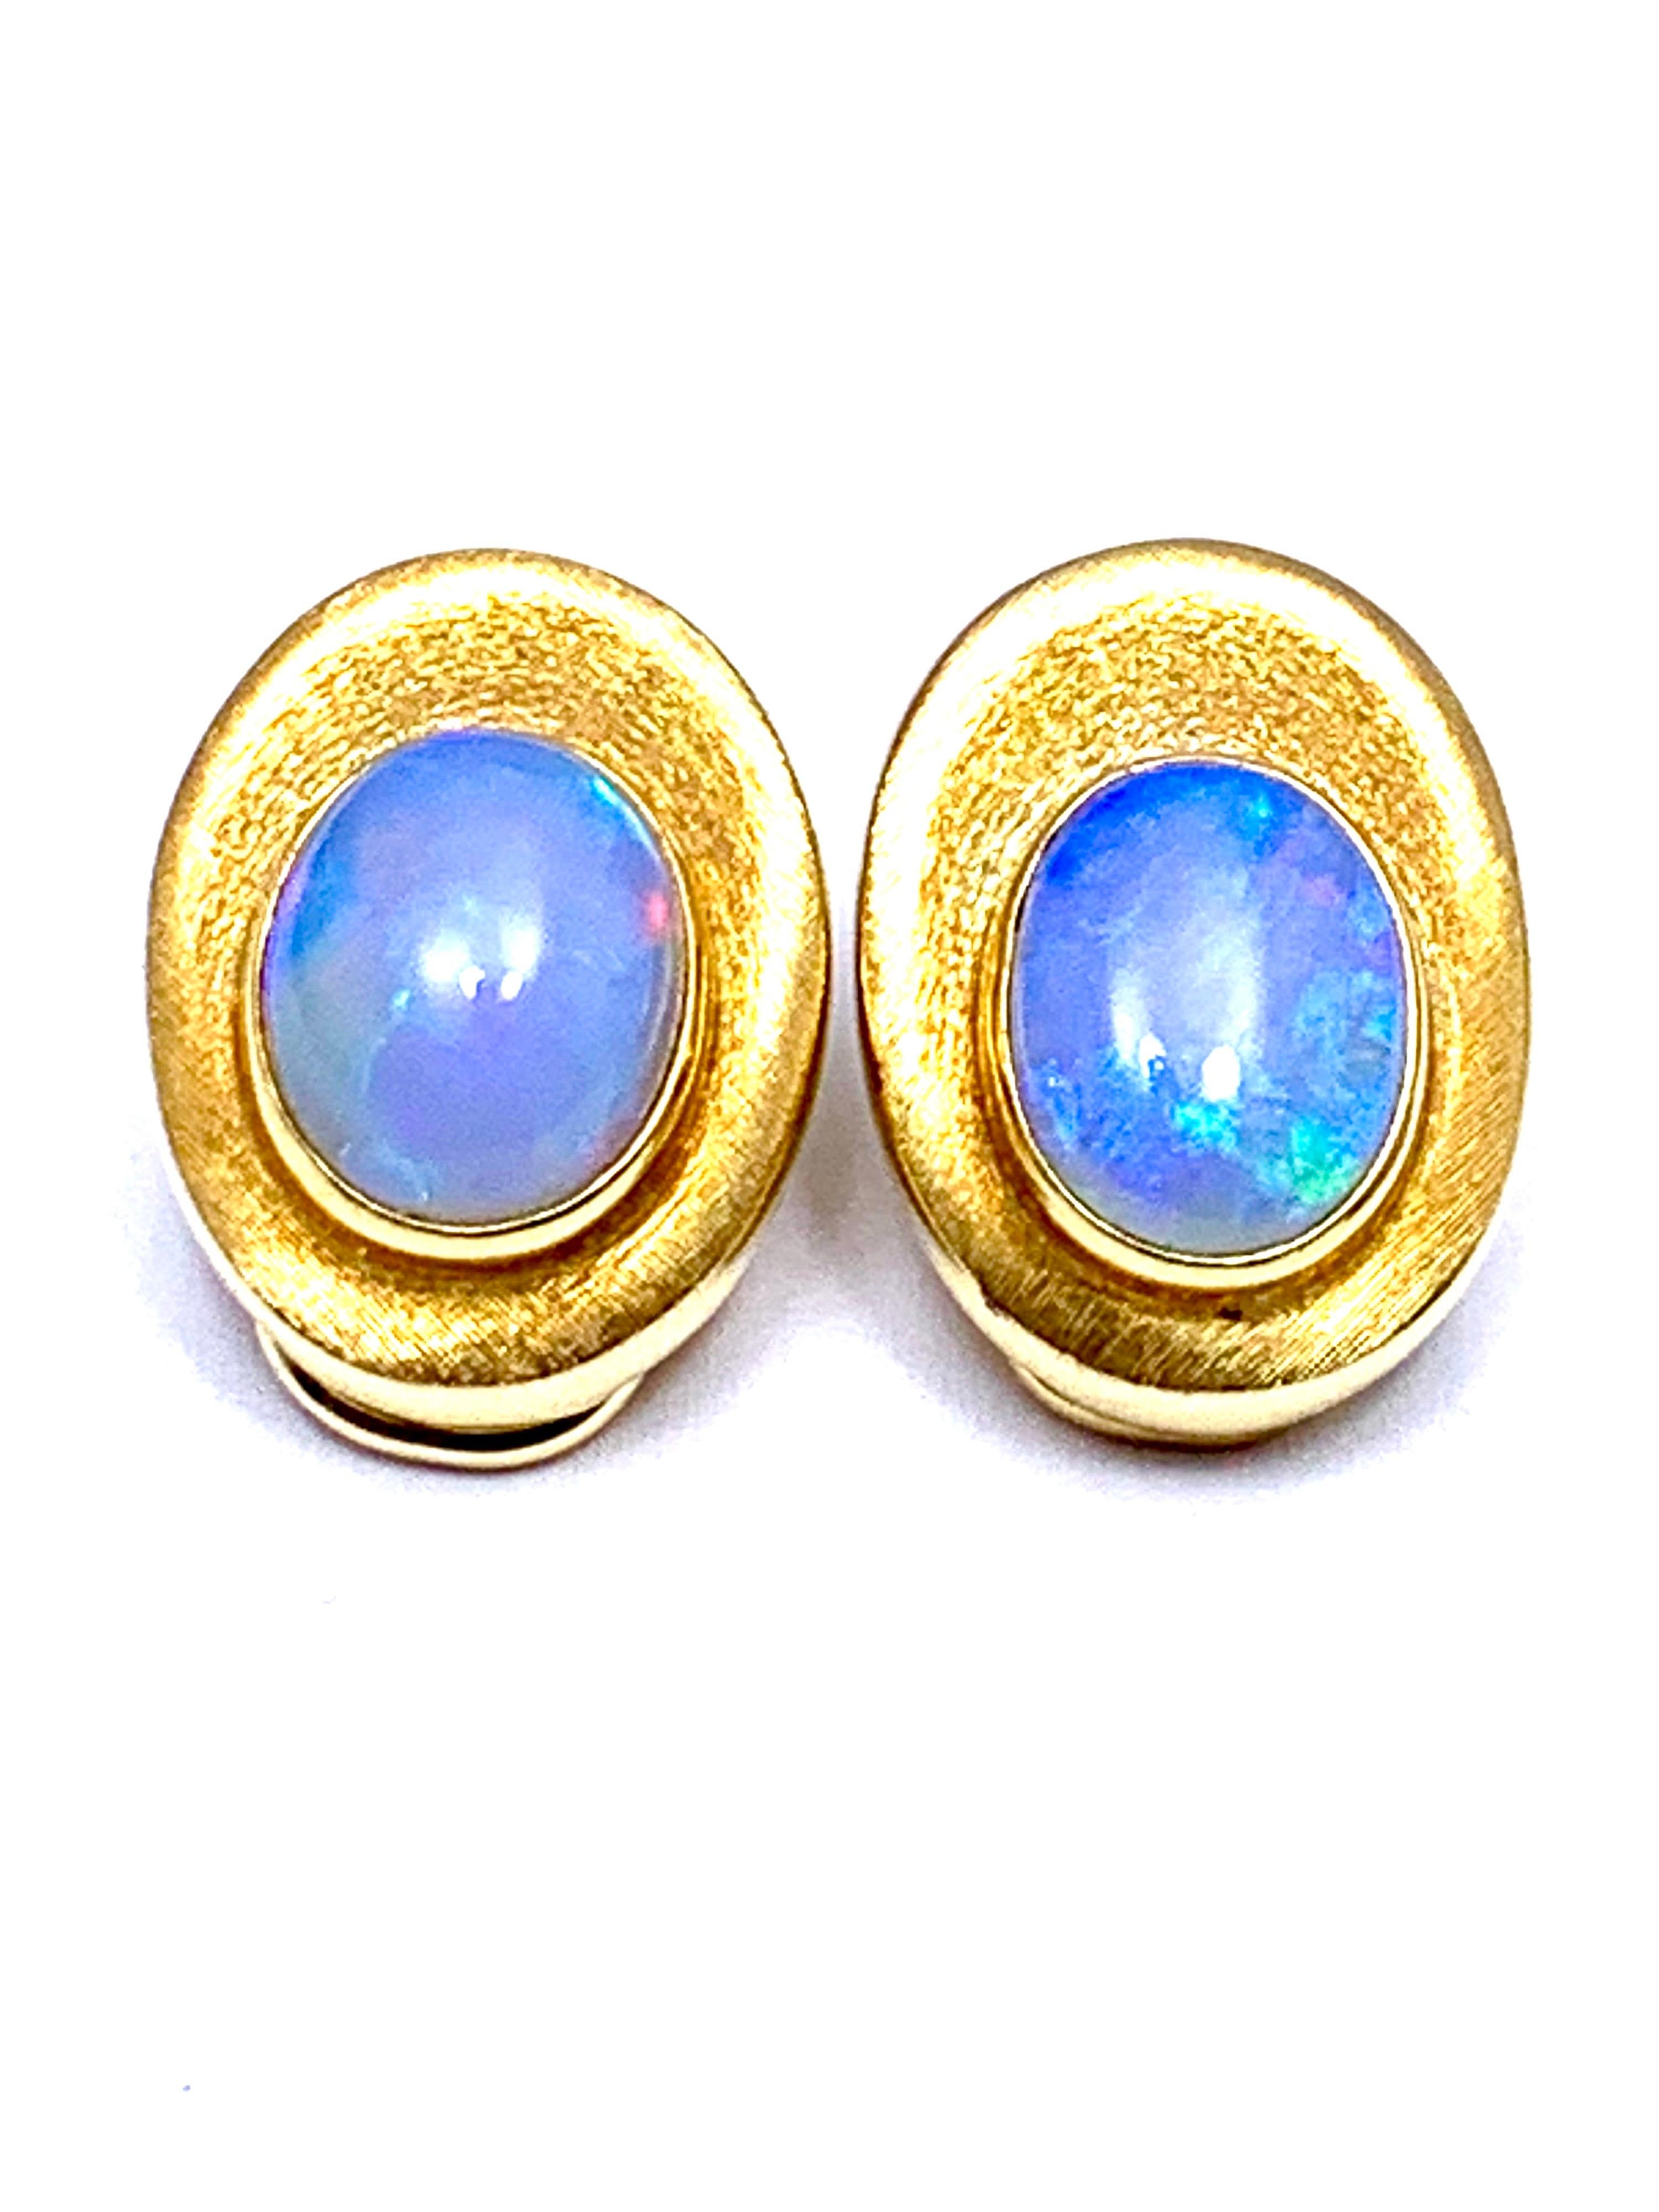 Bruno Guidi 3.65 Carat Oval Cabochon Opal and 18 Karat Yellow Gold Clip Earrings In Excellent Condition In Chevy Chase, MD